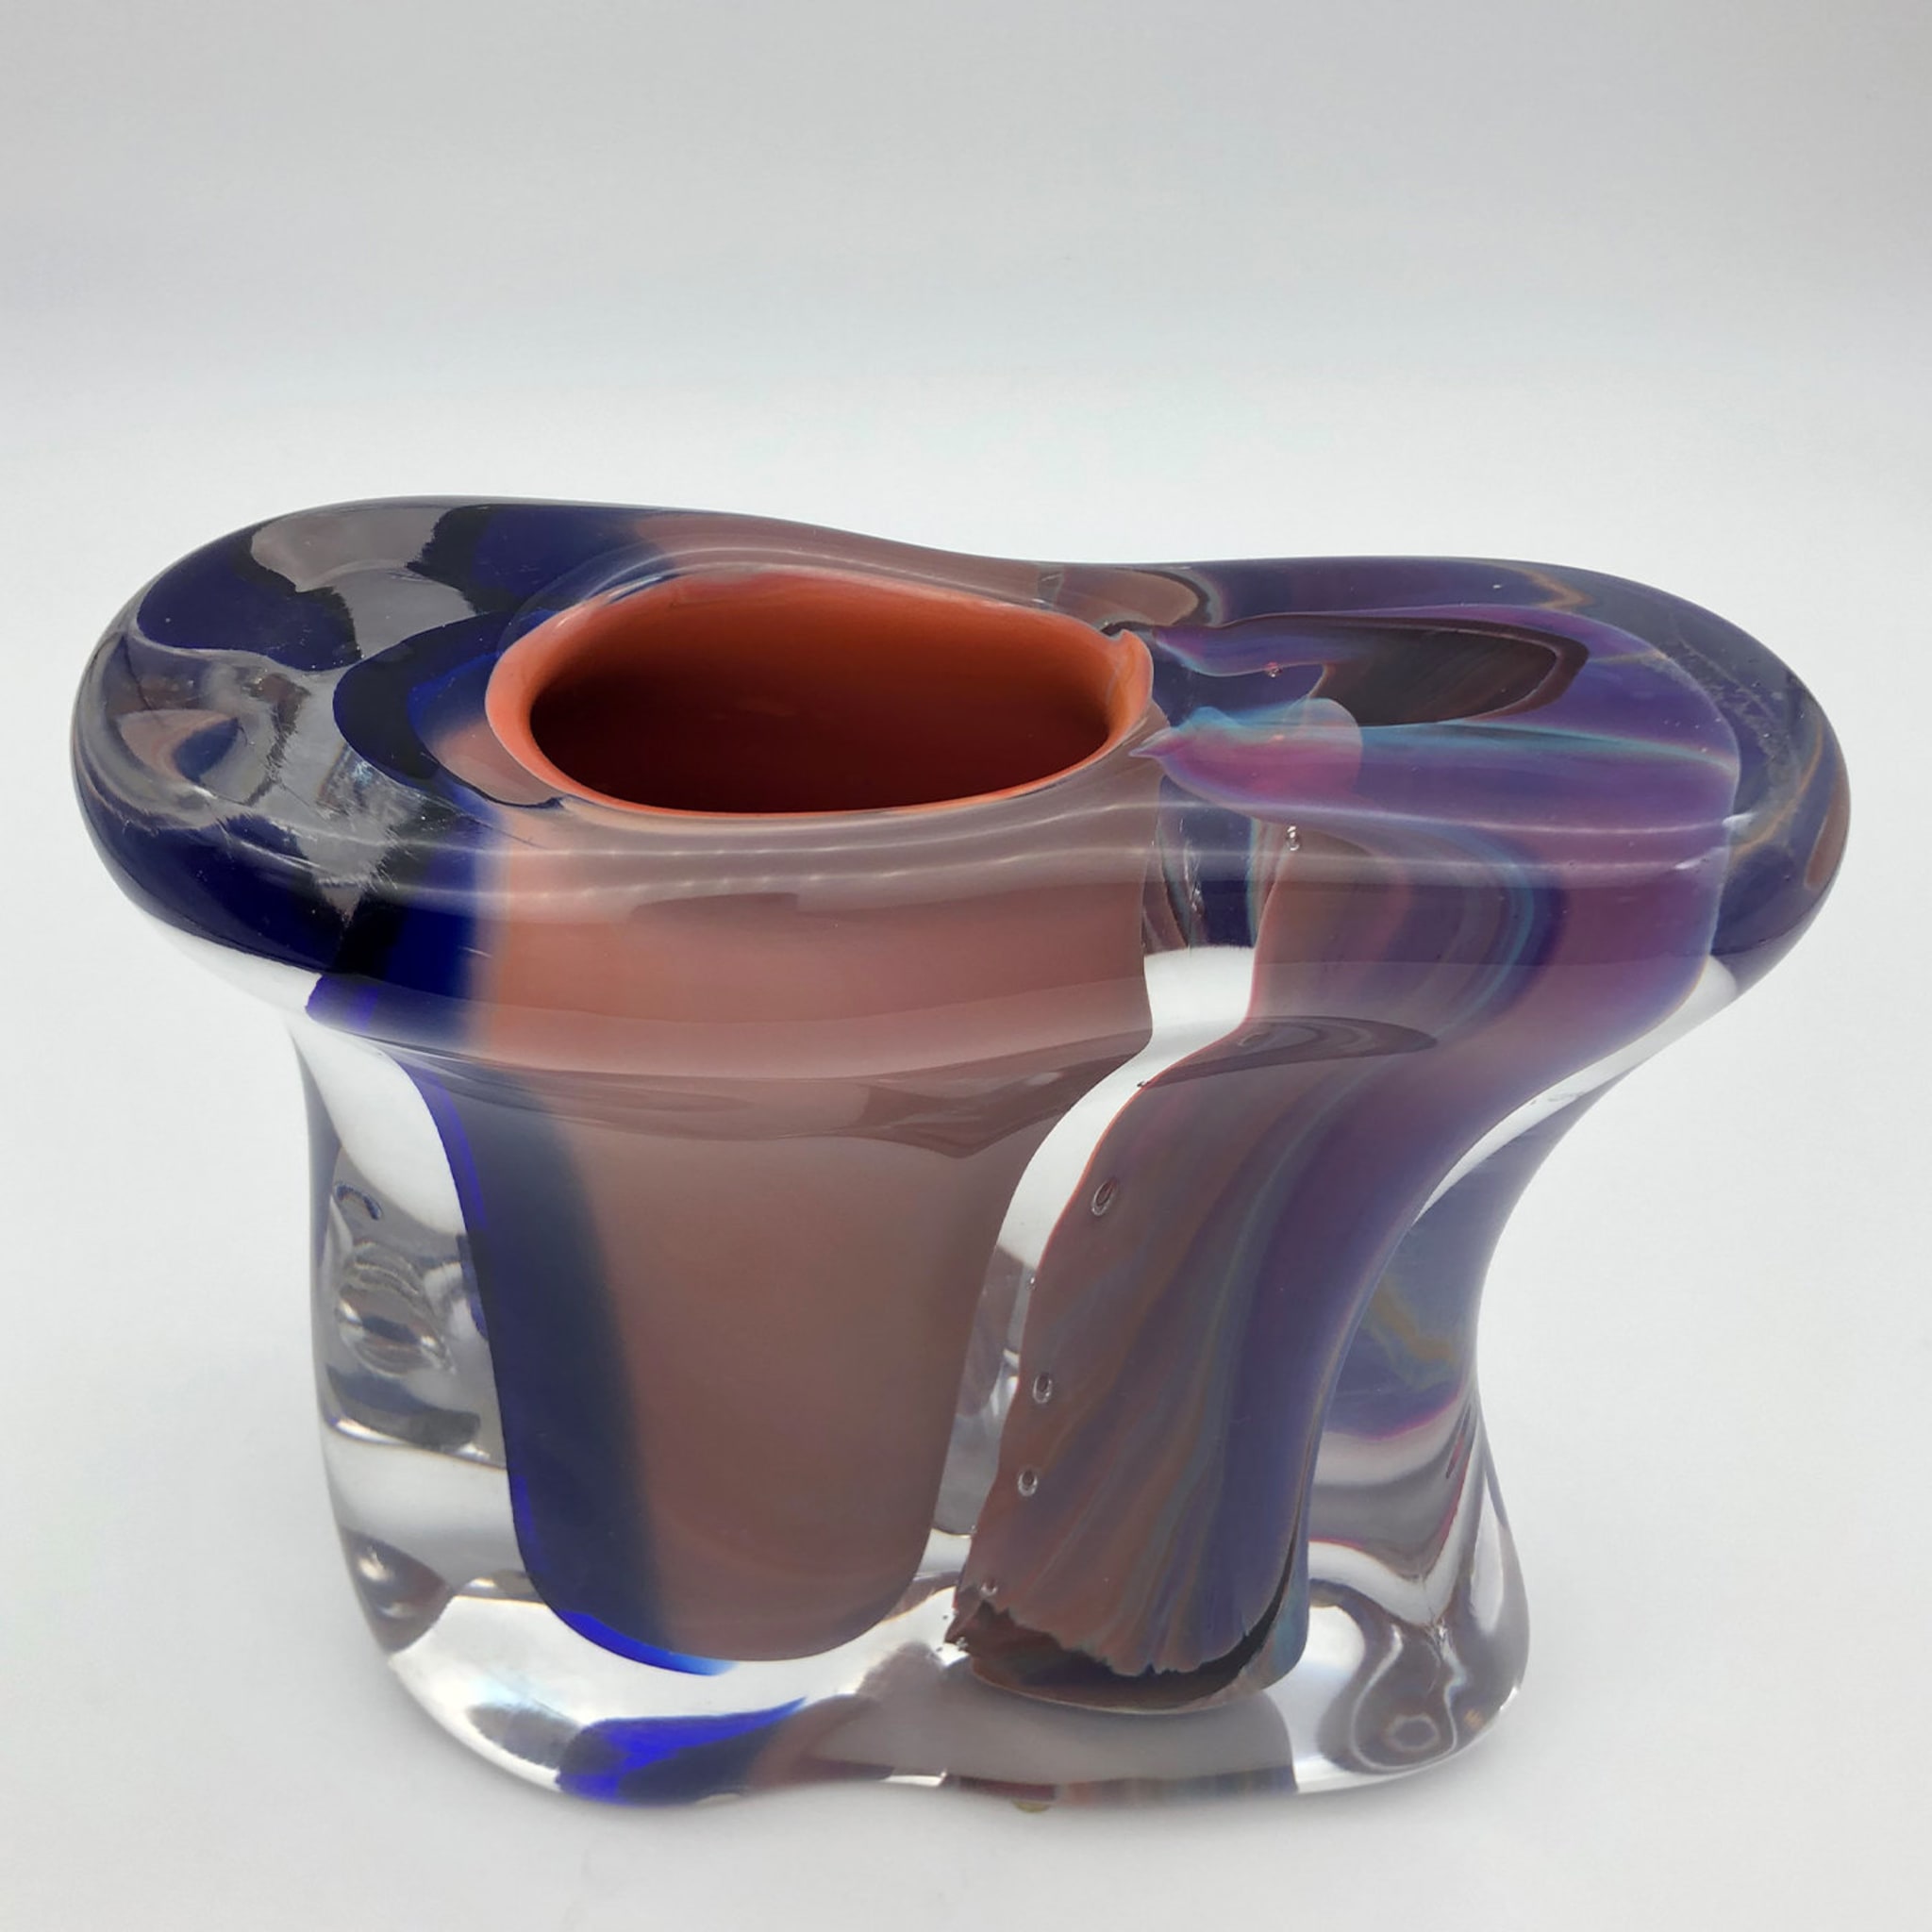 Chalcedony Vase by Toso Cristiano - Alternative view 1